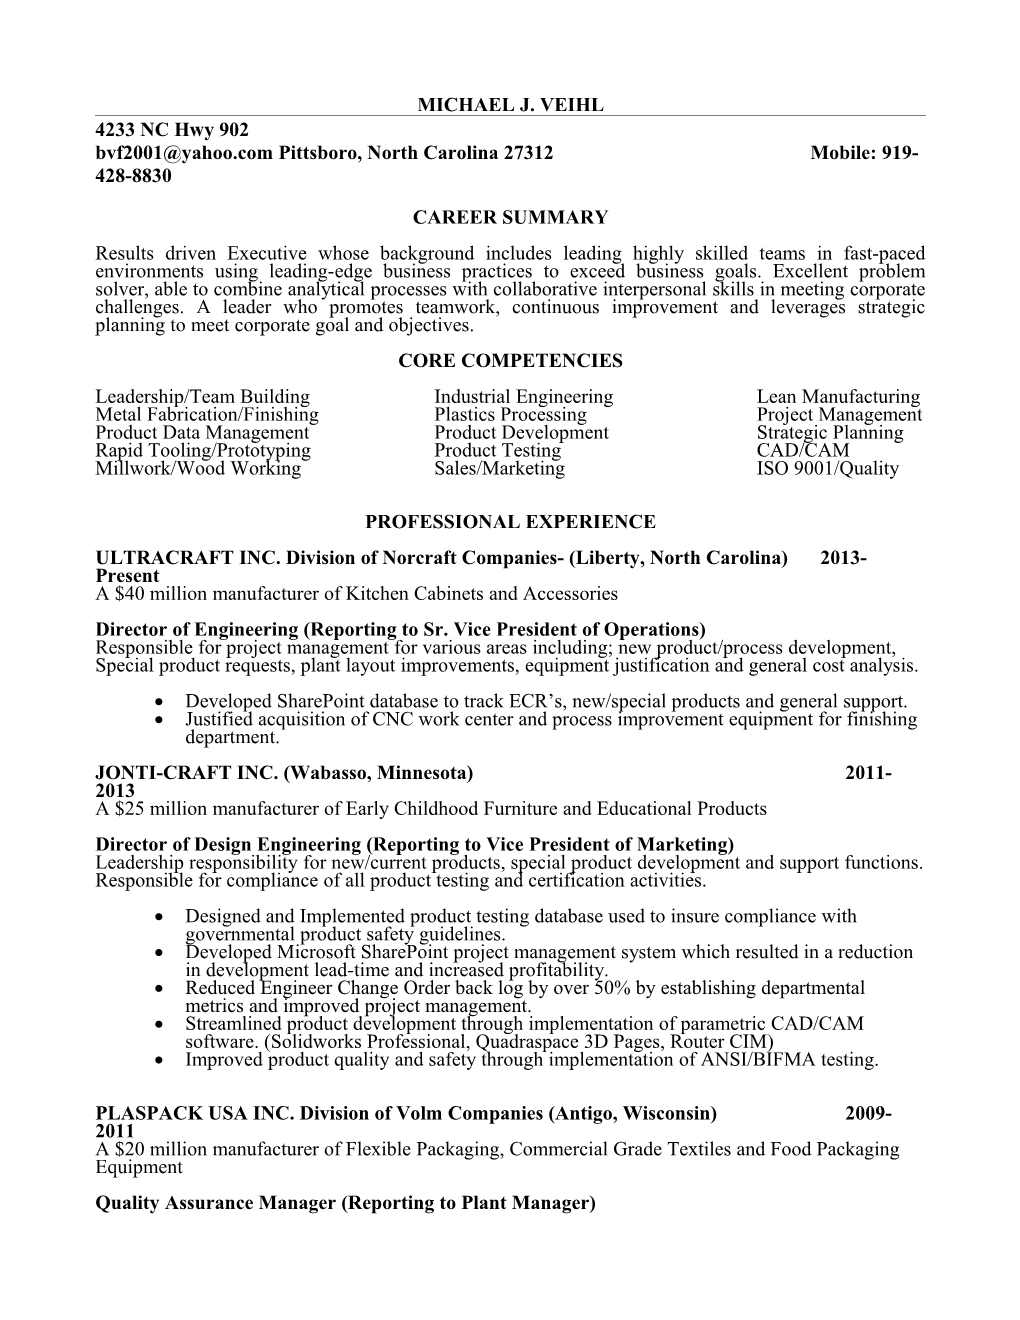 Sample Resume Format and Content